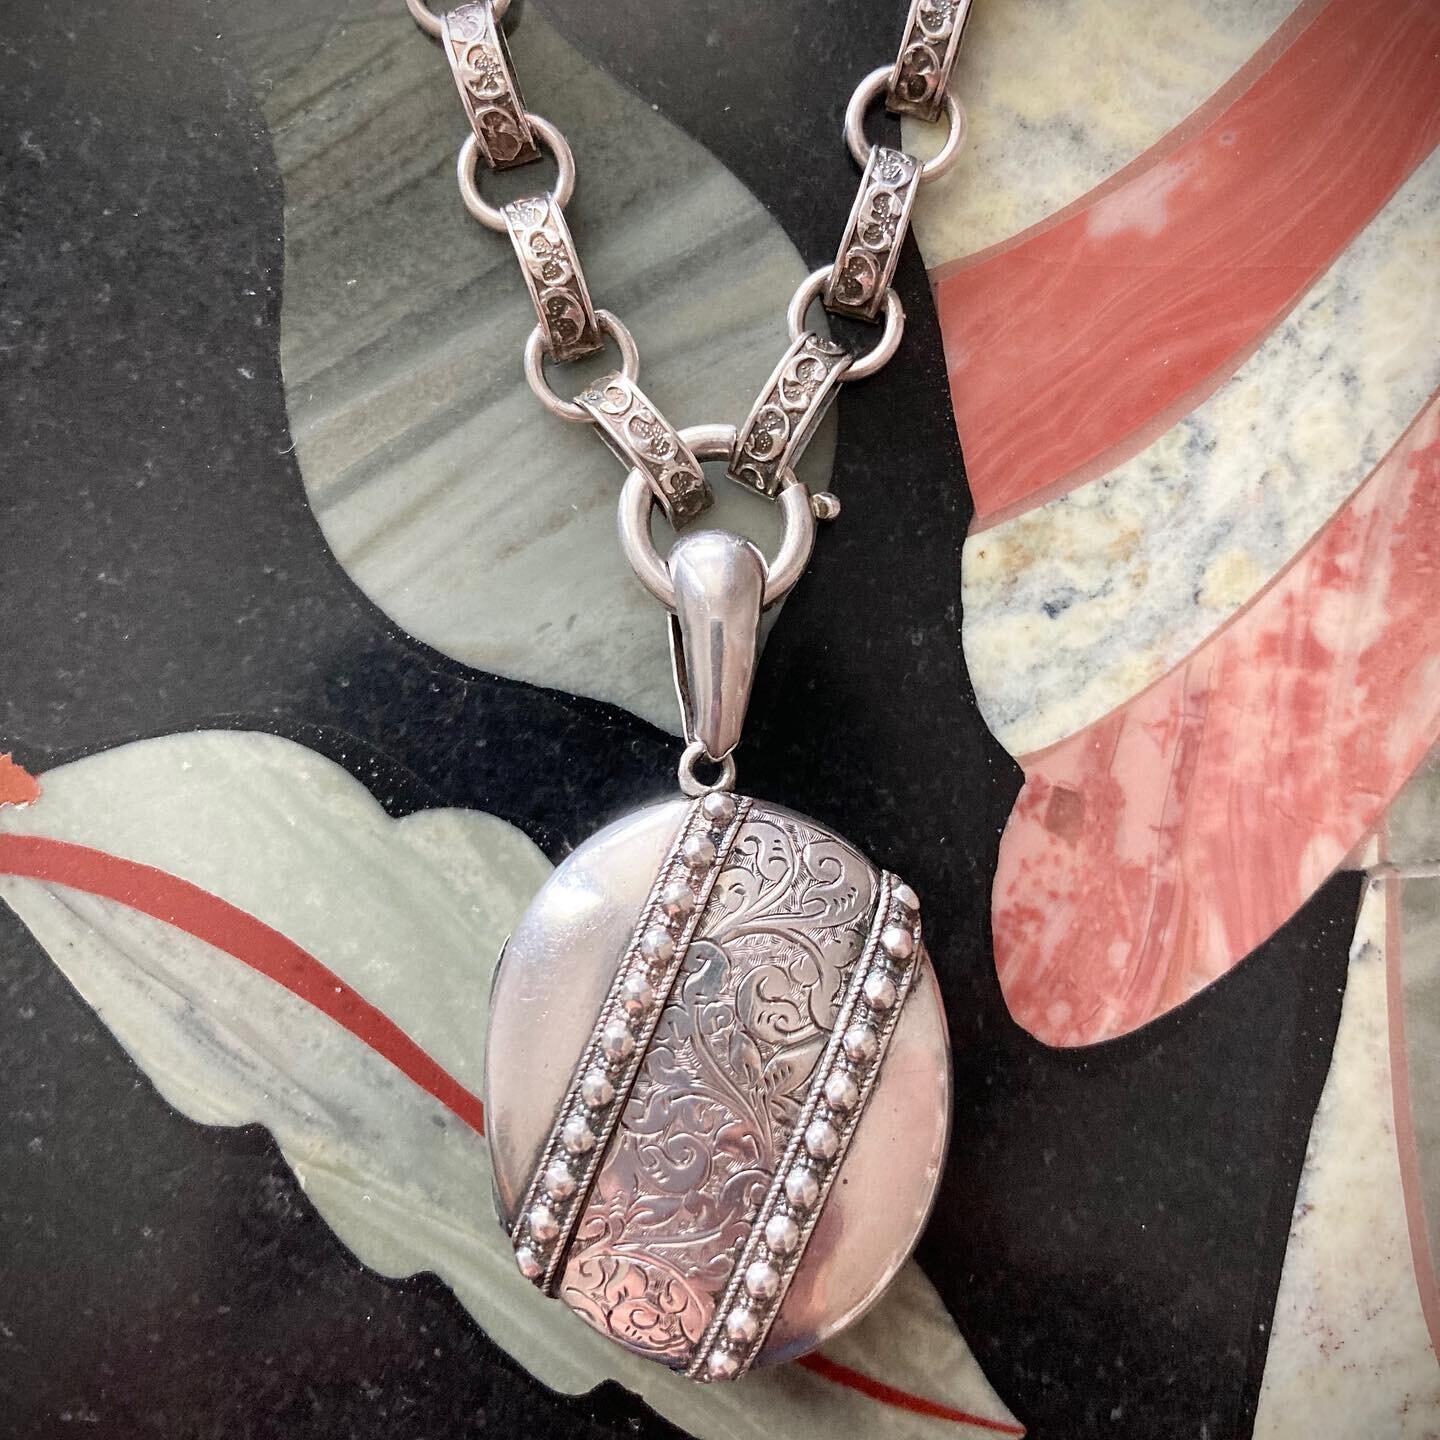 A beautiful Victorian Sterling Locket on Bookchain necklace.. Hope these smoky days blow away soon. #antquejewellery #victorianjewellery #bookchain #victoriansilver #antquedealersofinstagram #canadianantiques #antiquefindsbygoldfinch #antiquejewelry 